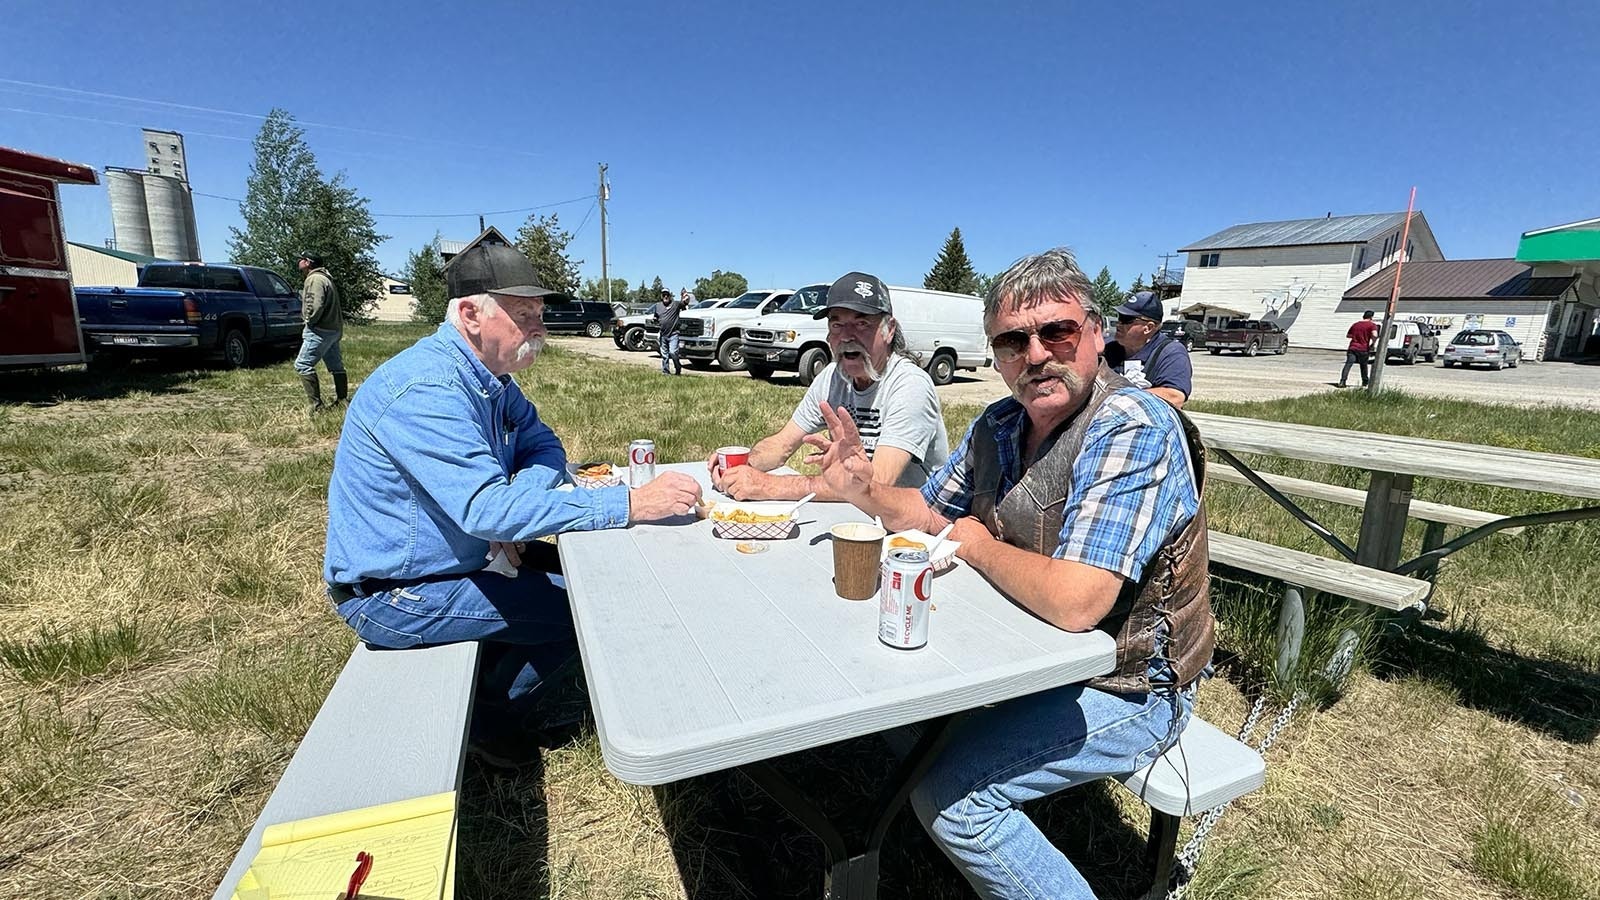 Above from left, Os Rigby, Hank Hatch and Jim Beard, ate hamburgers at a picnic table outside the Hot Diggity Dog food stand in Tetonia, Idaho, chewing the fat on the traffic mess in the Teton Valley. They wondered why WYDOT wasn’t helping out with the grading on the old Reclamation Road that runs up near Grassy Lake Dam in Wyoming by the southern boundary of Yellowstone National Park.